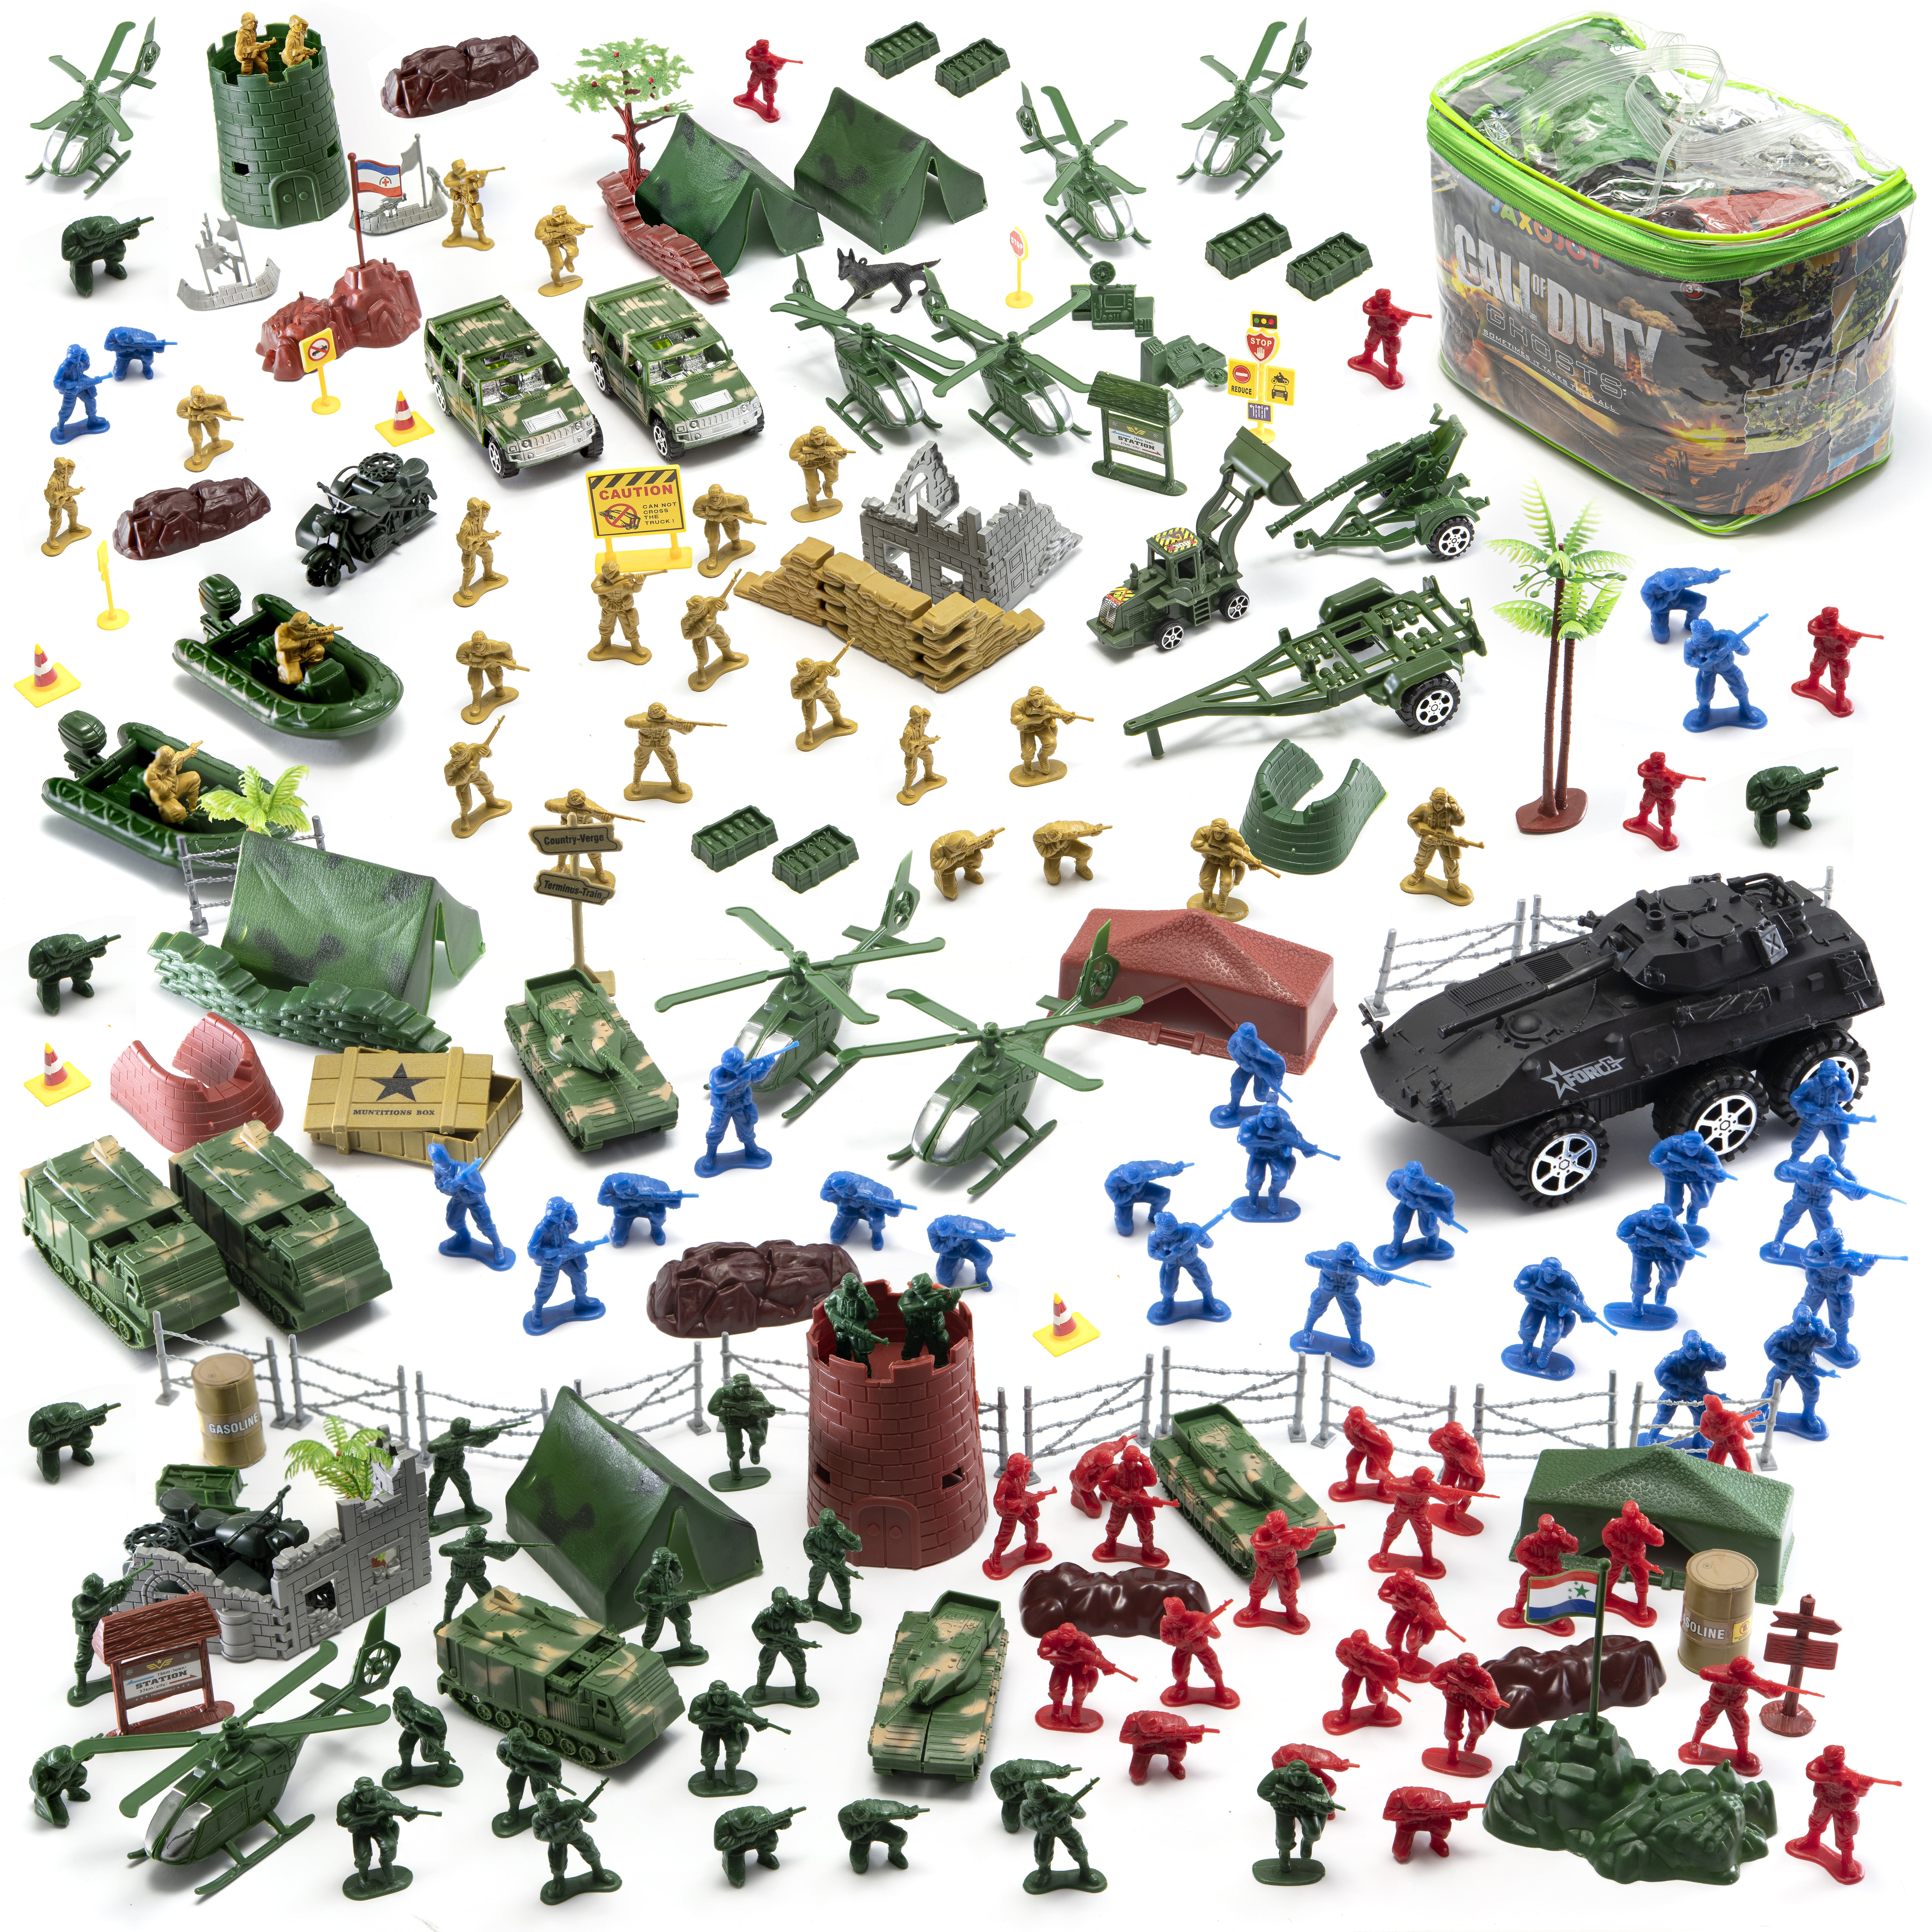 200pcs Mini Plastic Army Men Figures Soldiers Toy for Army Base Playset 